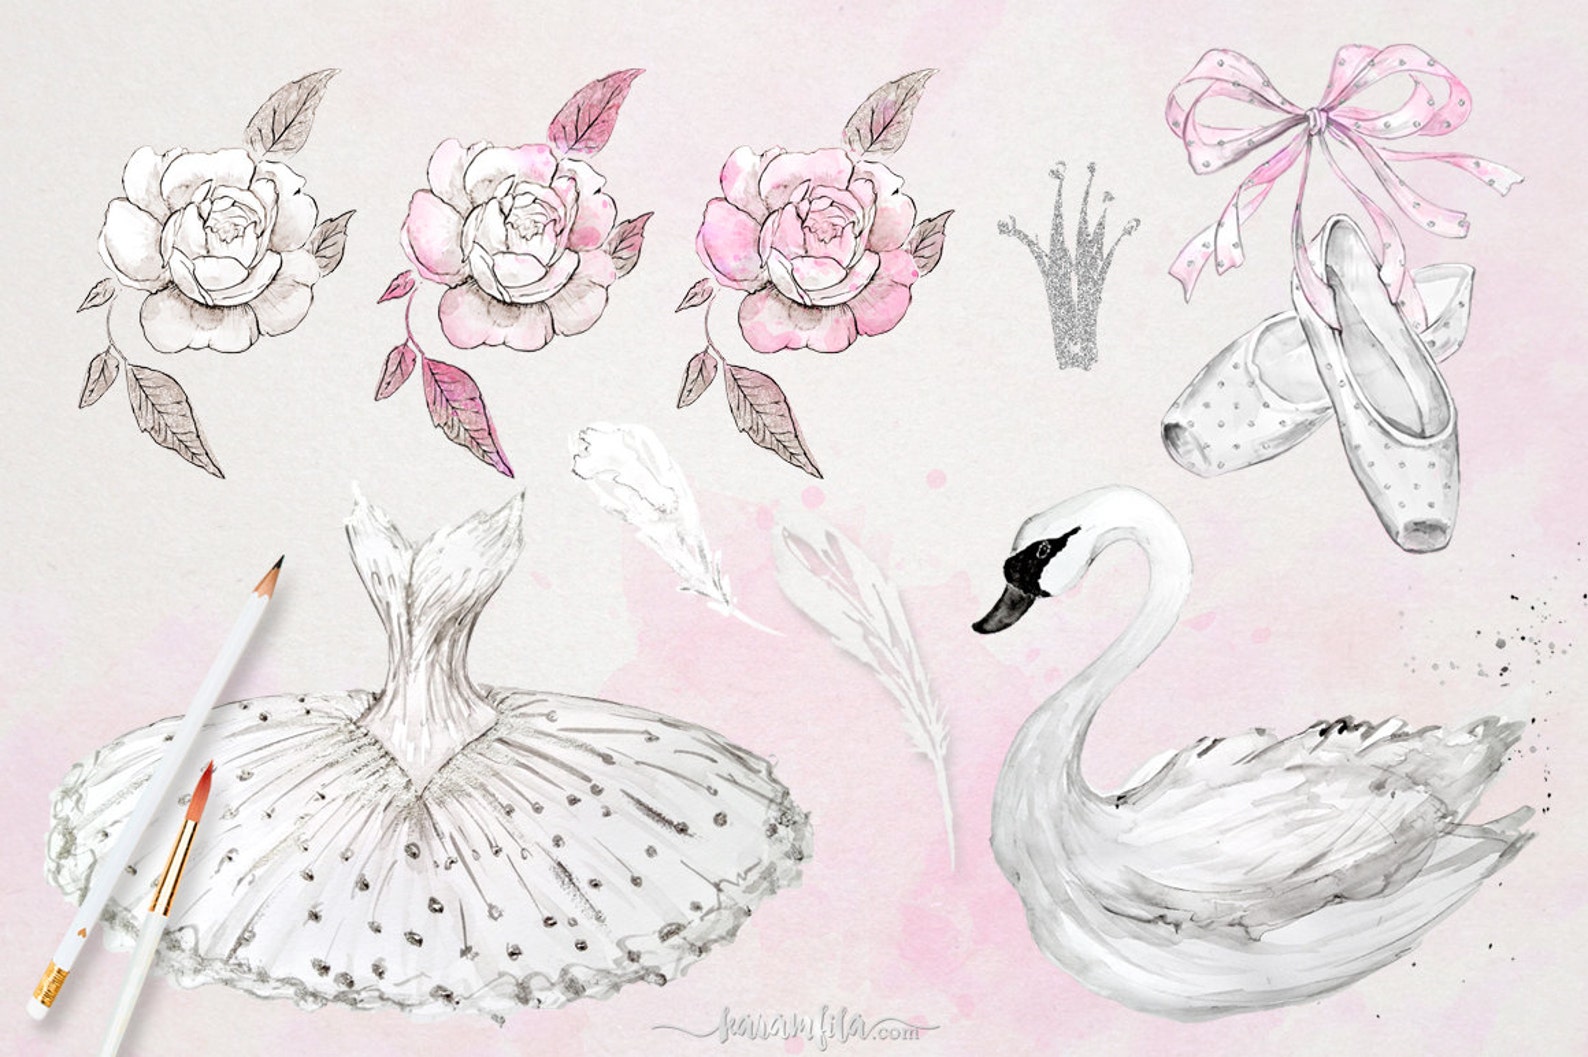 ballet clipart watercolor ballerina white swan lake illustration handpainted pointe shoes tutu dress feather crown silver glitte